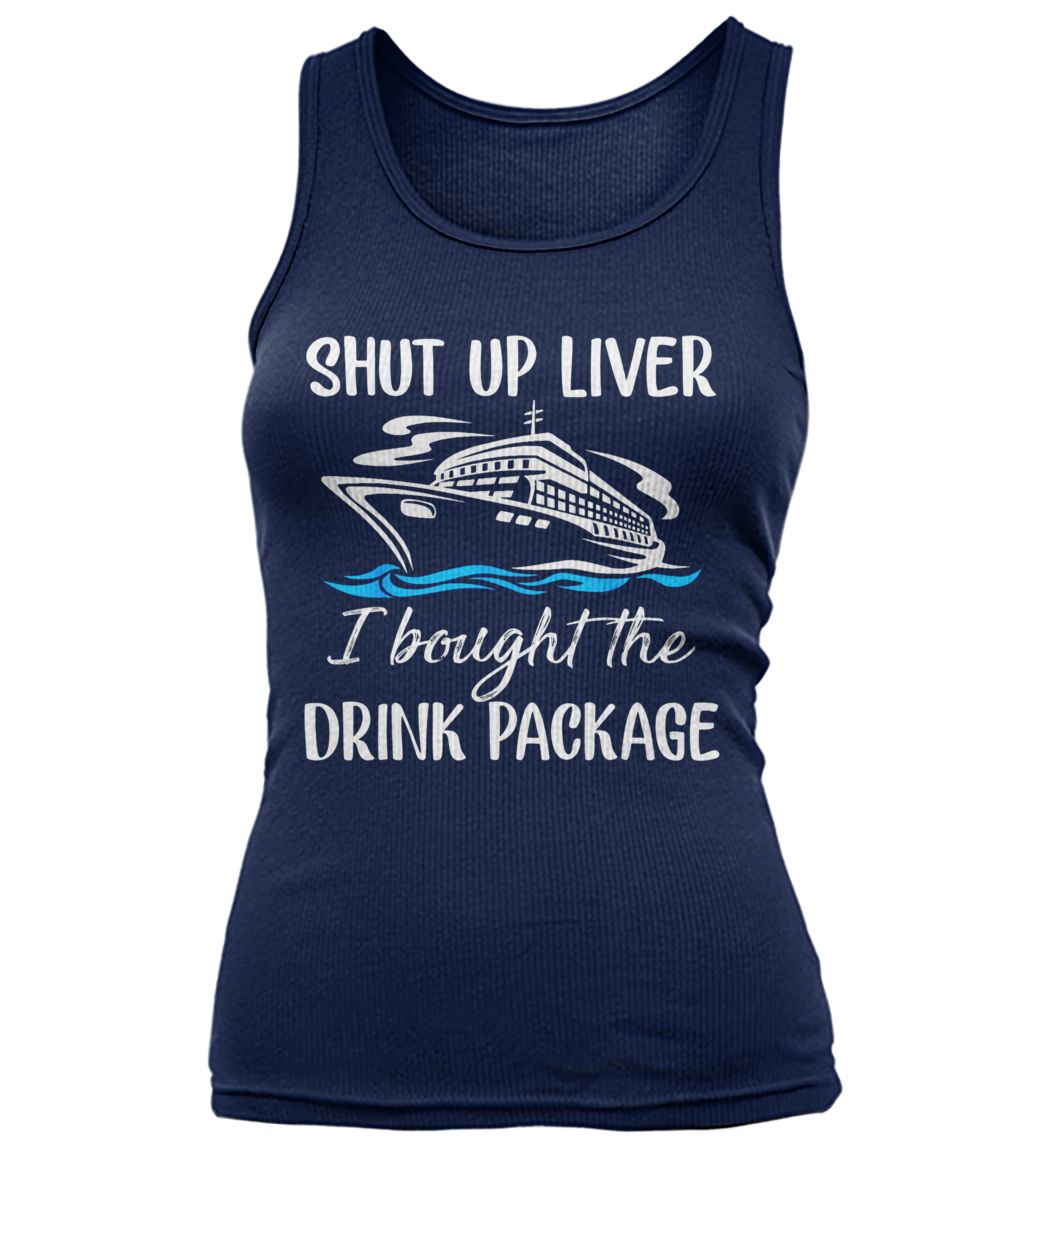 Cruise shut up liver I bought the drink package women's tank top